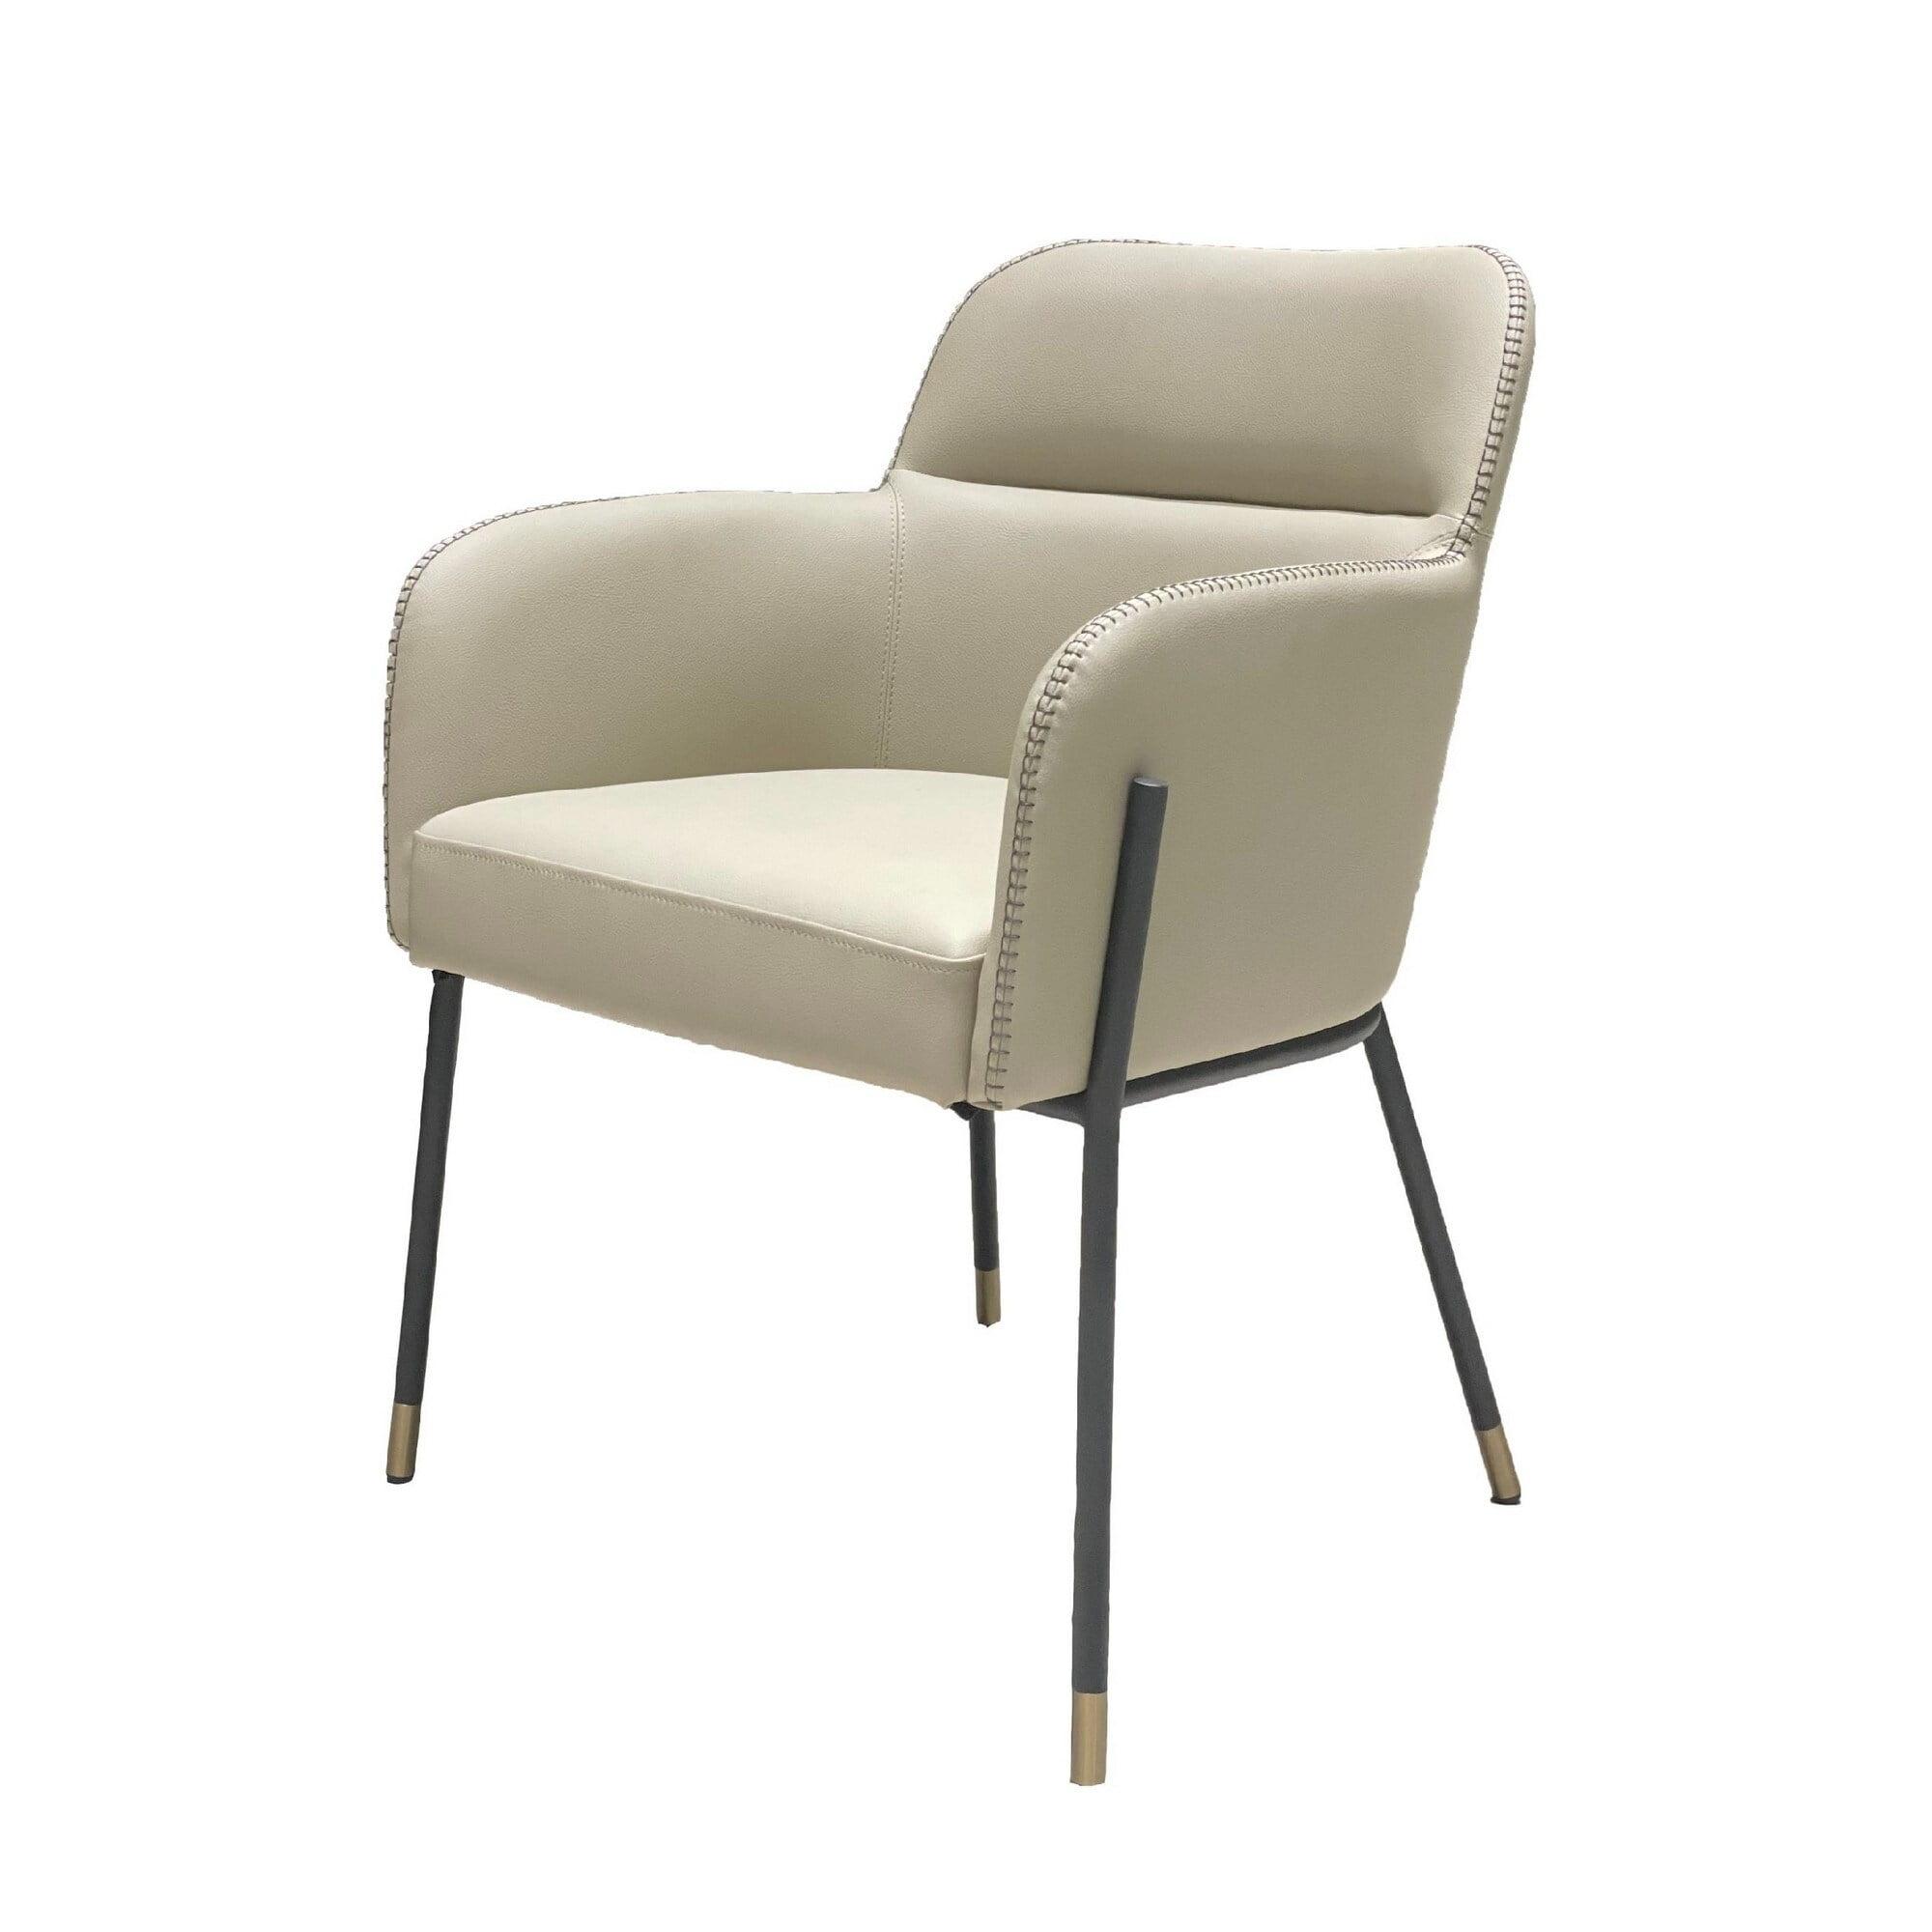 Beige Vegan Faux Leather Side Chair with Gold-Tipped Metal Legs